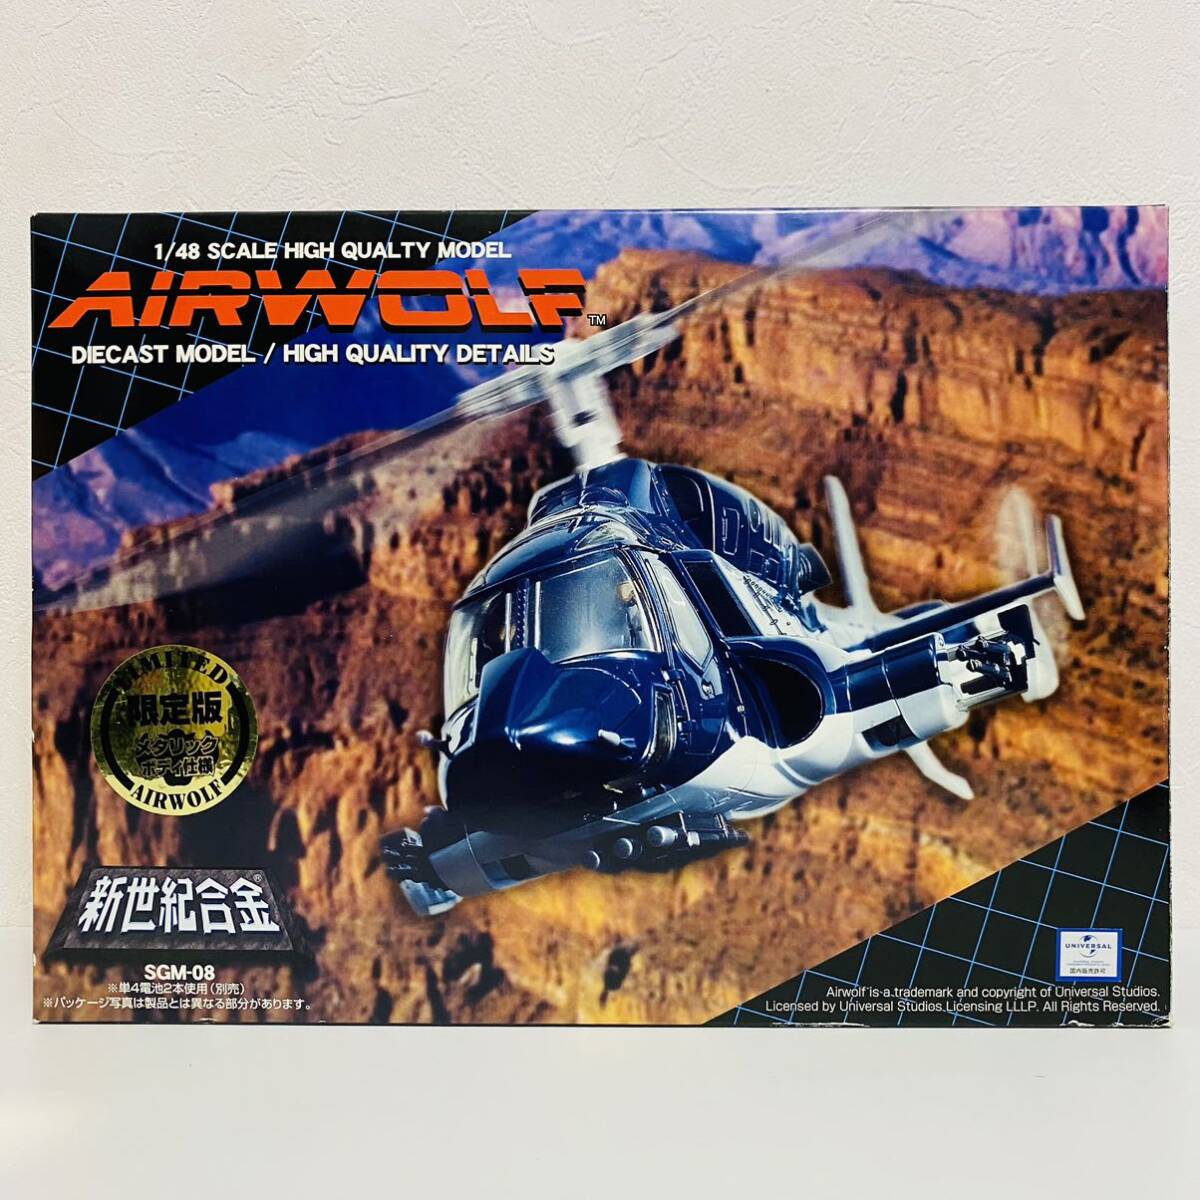 [ present condition goods ]MIRACLE HOUSE miracle house Aoshima new century alloy 1/48 scale AIR WOLF air Wolf SGM-08 operation verification settled Junk 